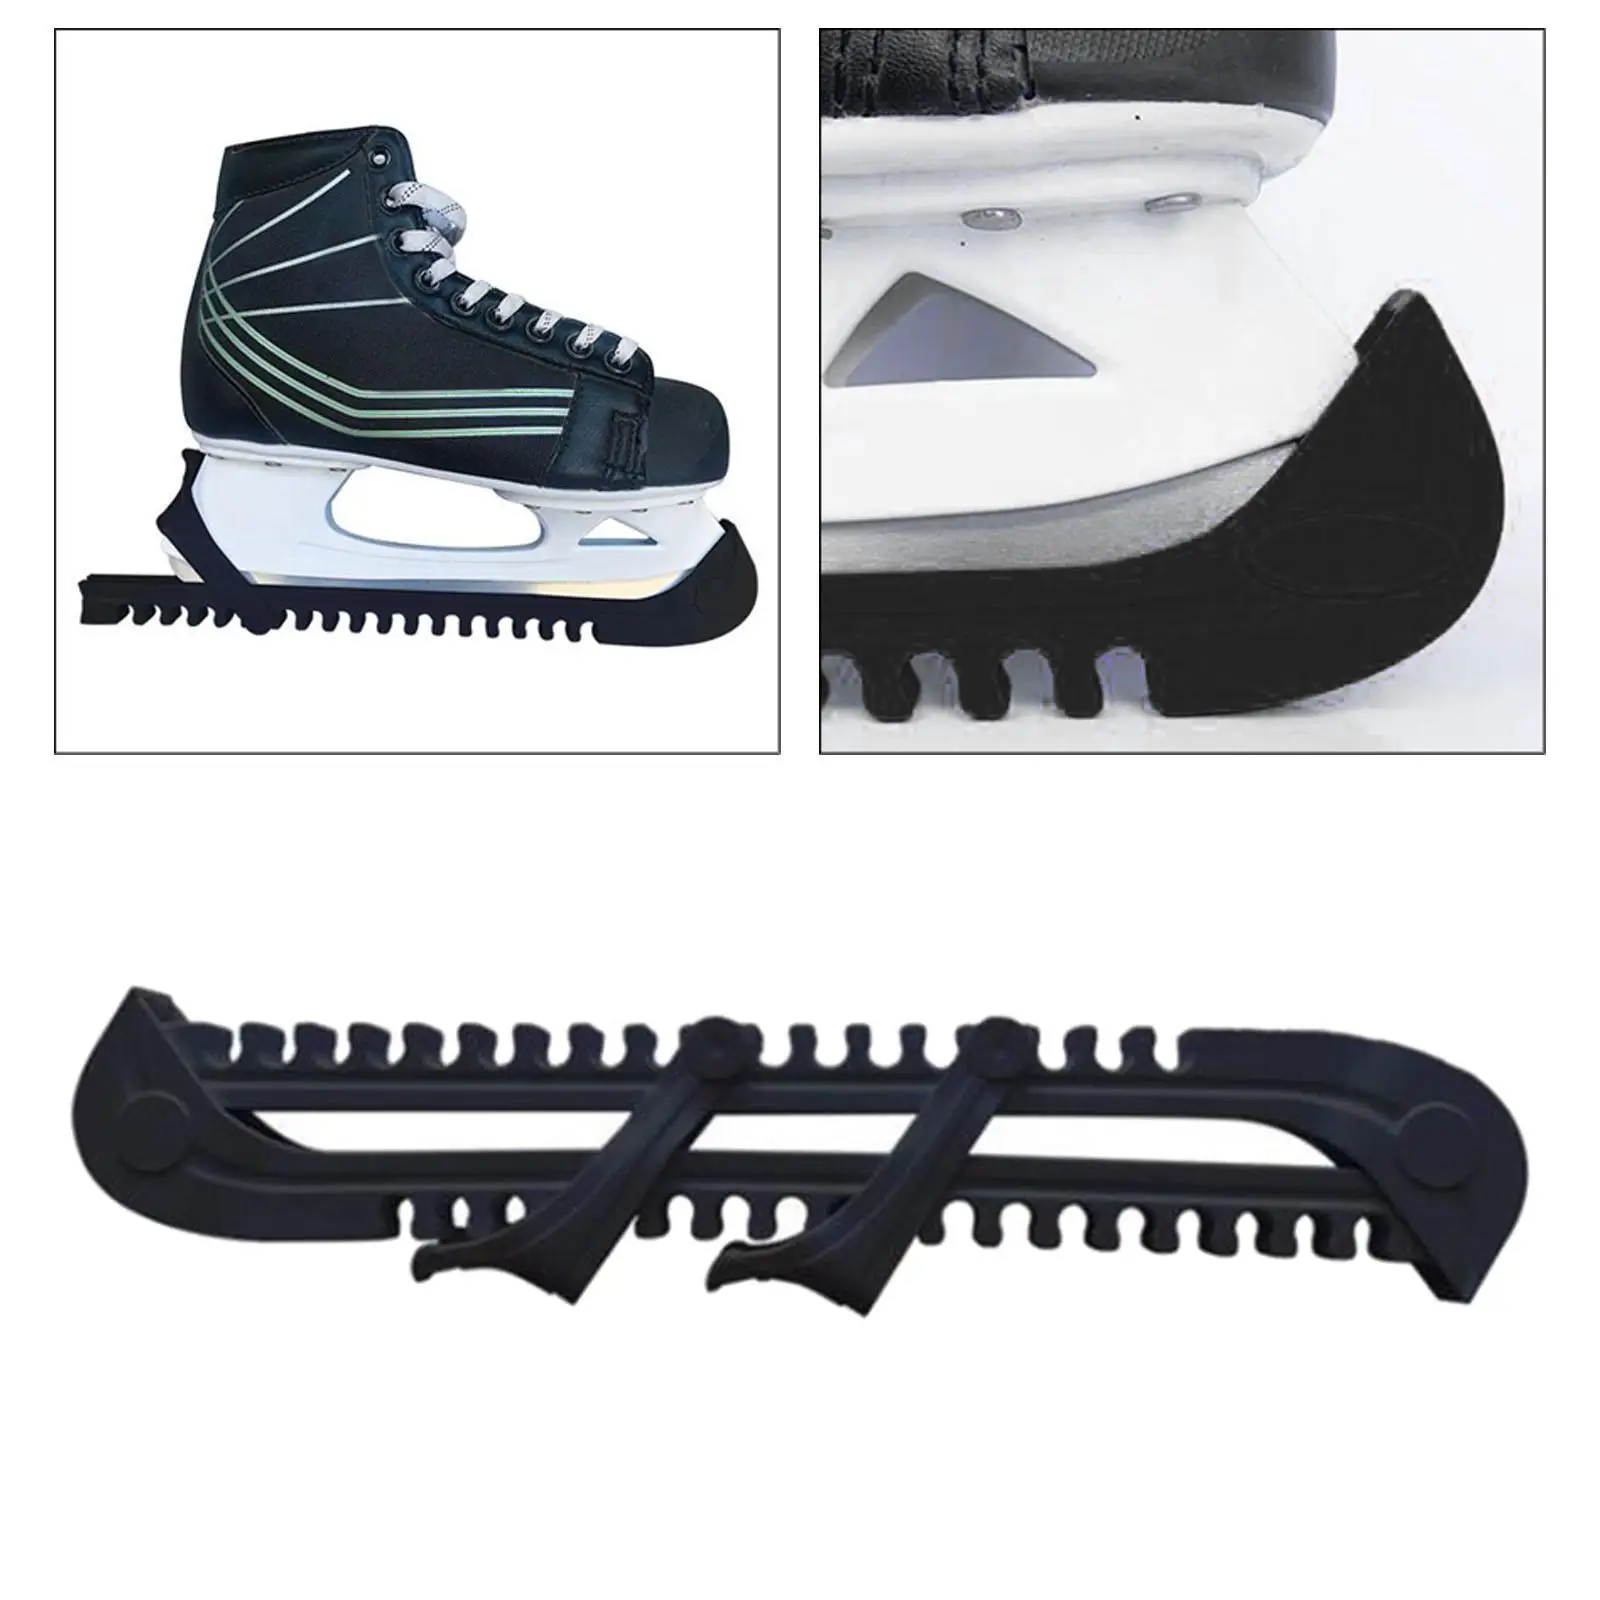 Flexible Skates Accessories Blade Covers Protective Ice Skates